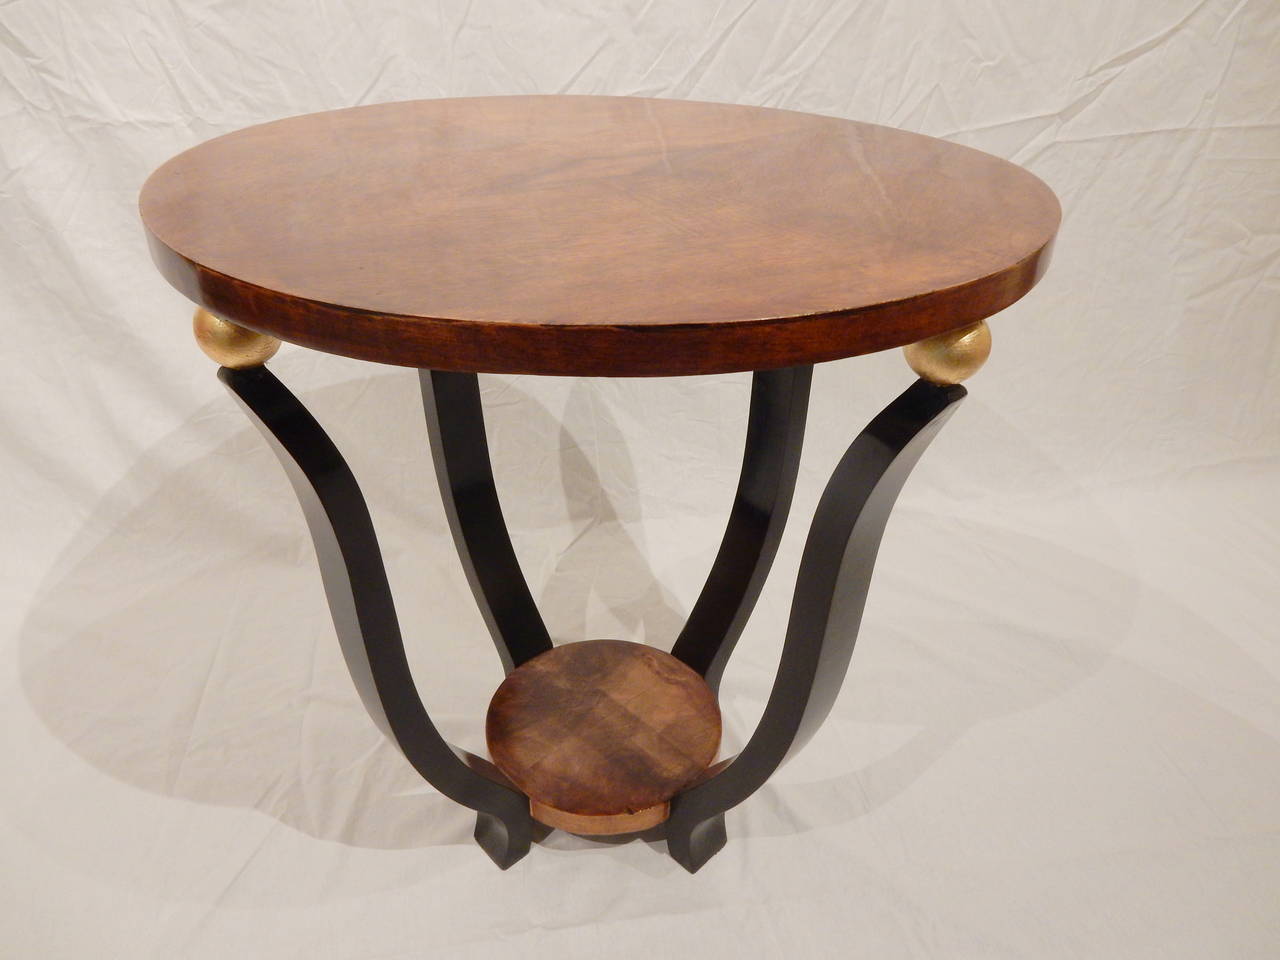 Art Deco round table with black painted table ribs and gilt balls holding a beautiful walnut top. Carefully restored.